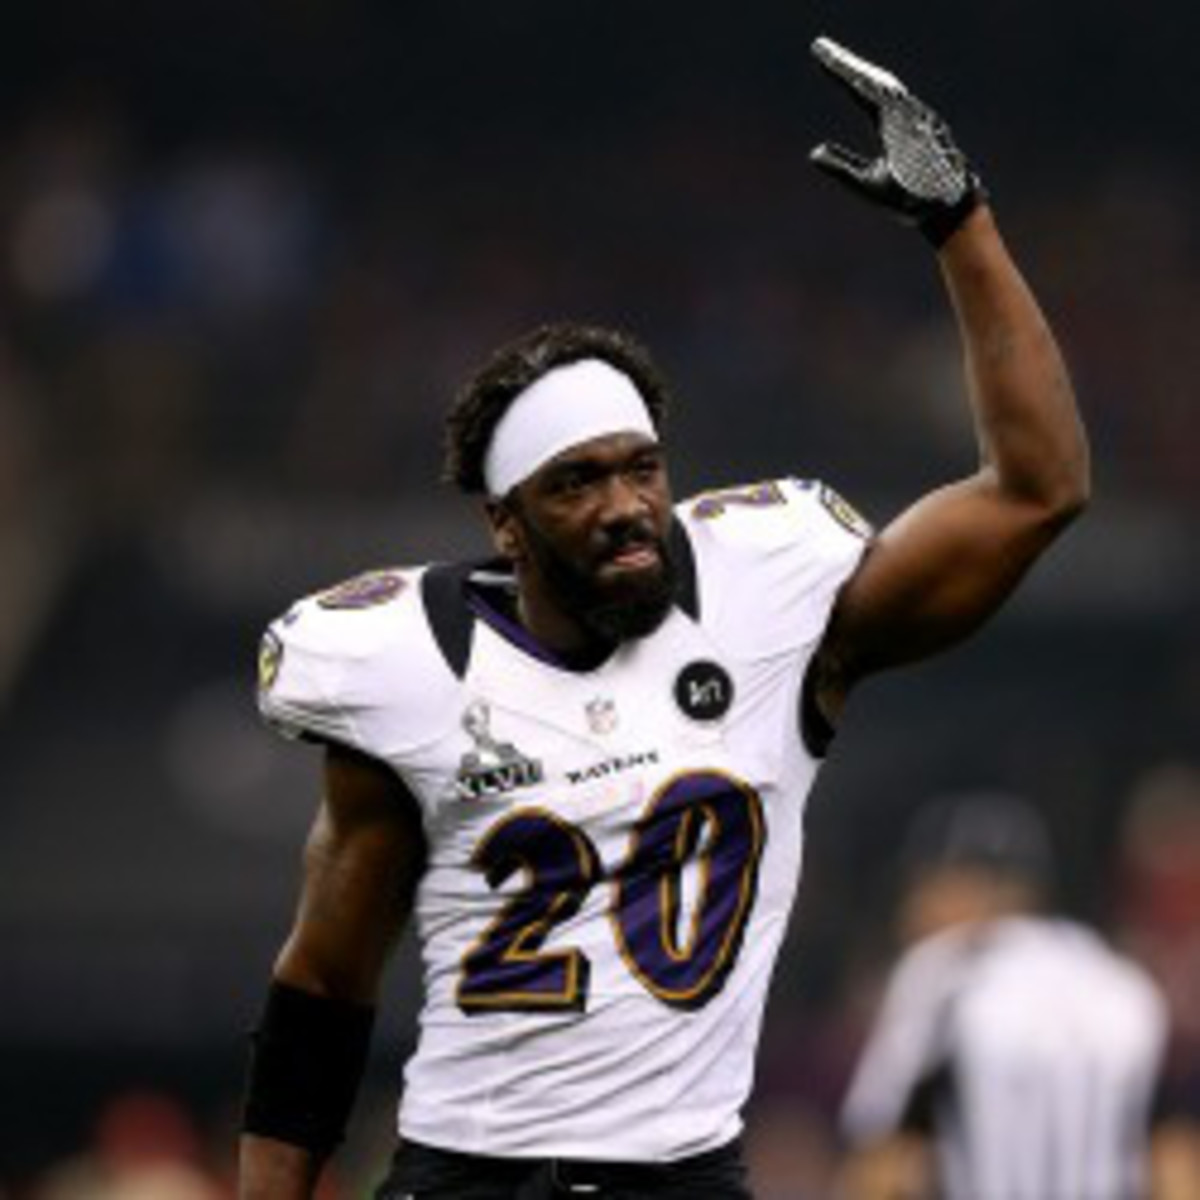 Texans safety Ed Reed underwent hip surgery and the team is concerned he could miss part of training camp. (Getty Images)